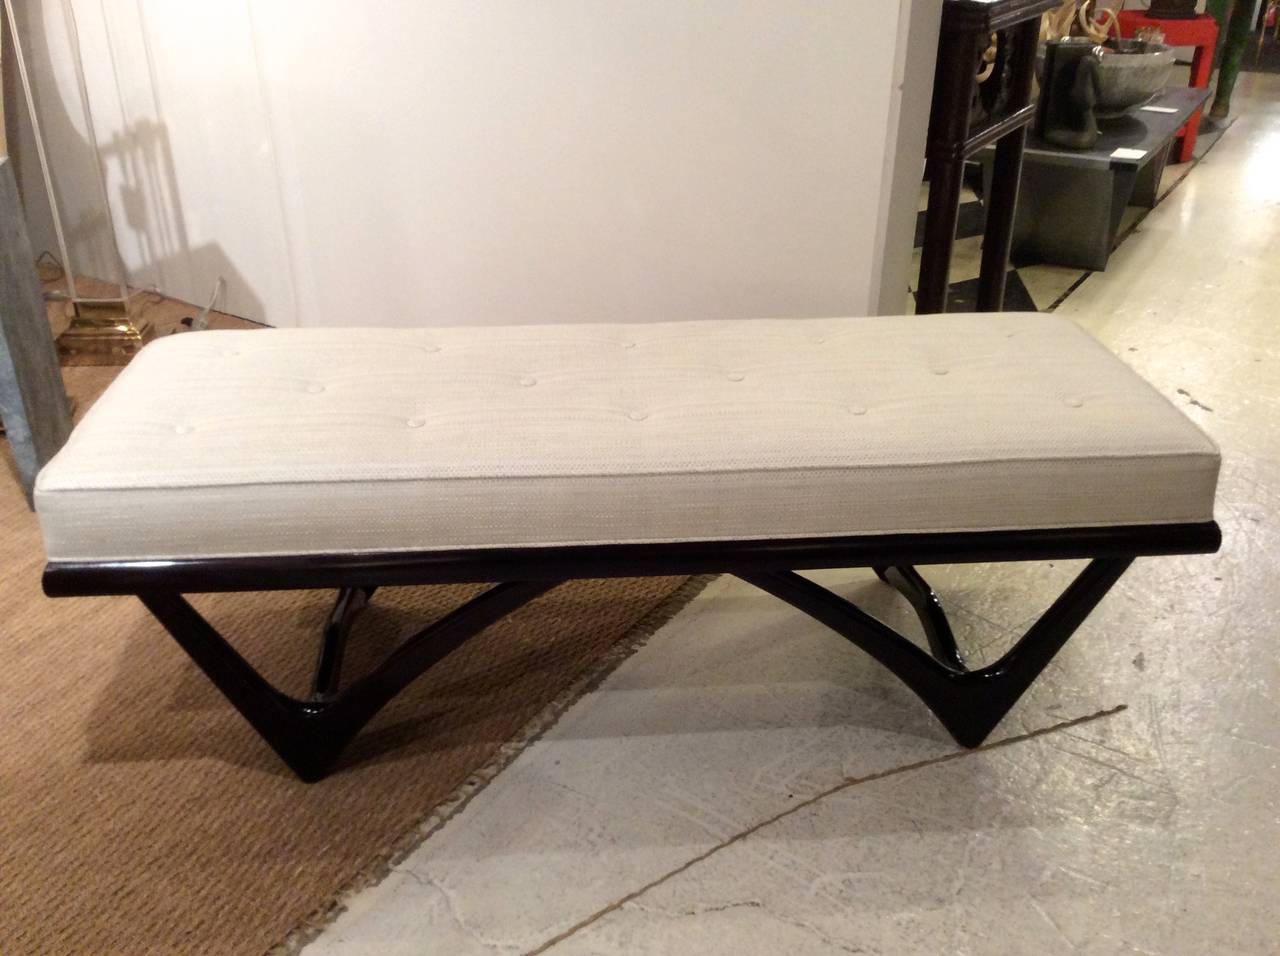 Newly refinished frame in a rich dark sable stain and gloss finish. Sculptural Frame in style of Adrian Pearsall or Kagan style bench is button tufted and beautifully finished in contrasting cream tweed woven fabric.